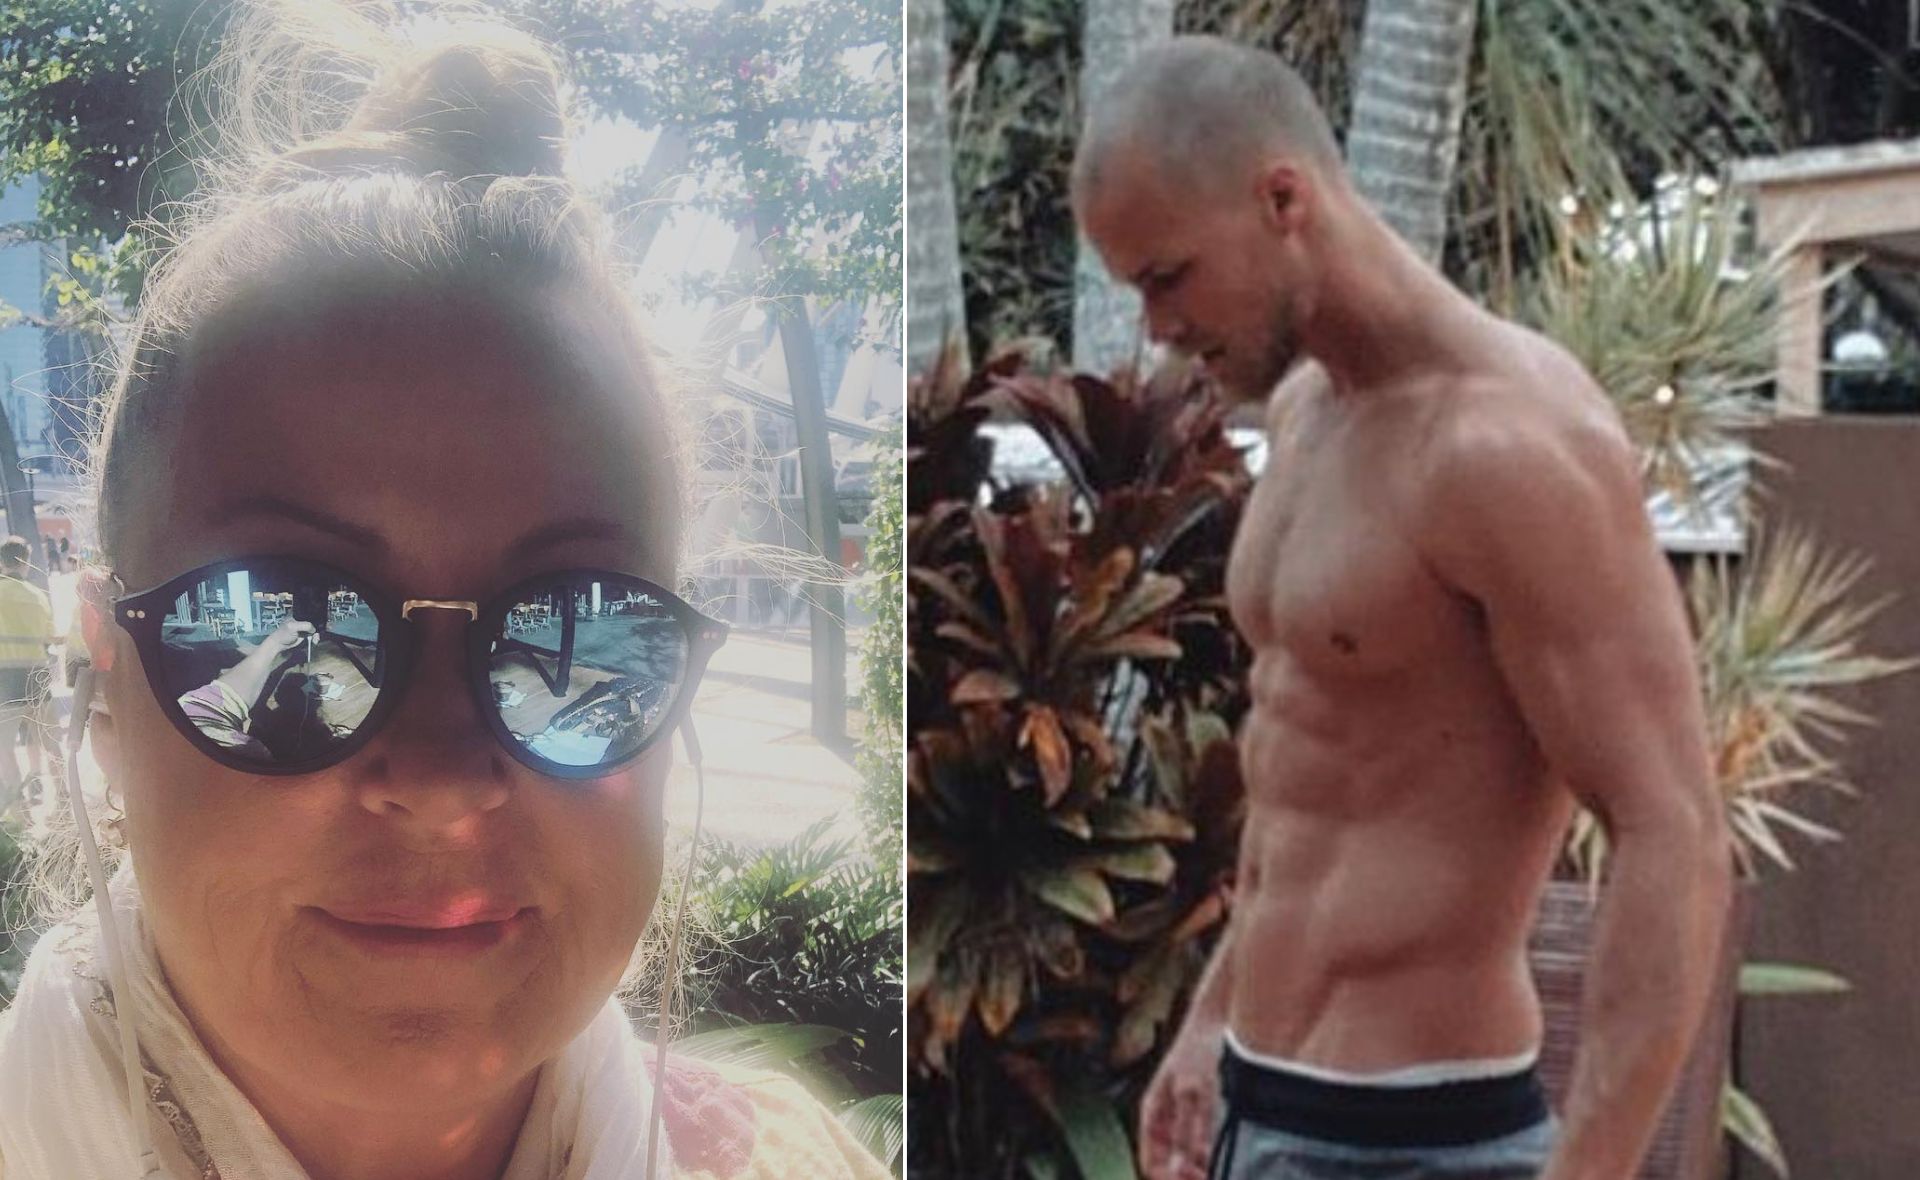 “Well done Jett.” Lisa Curry gushes over her son Jett Kenny’s insane physique